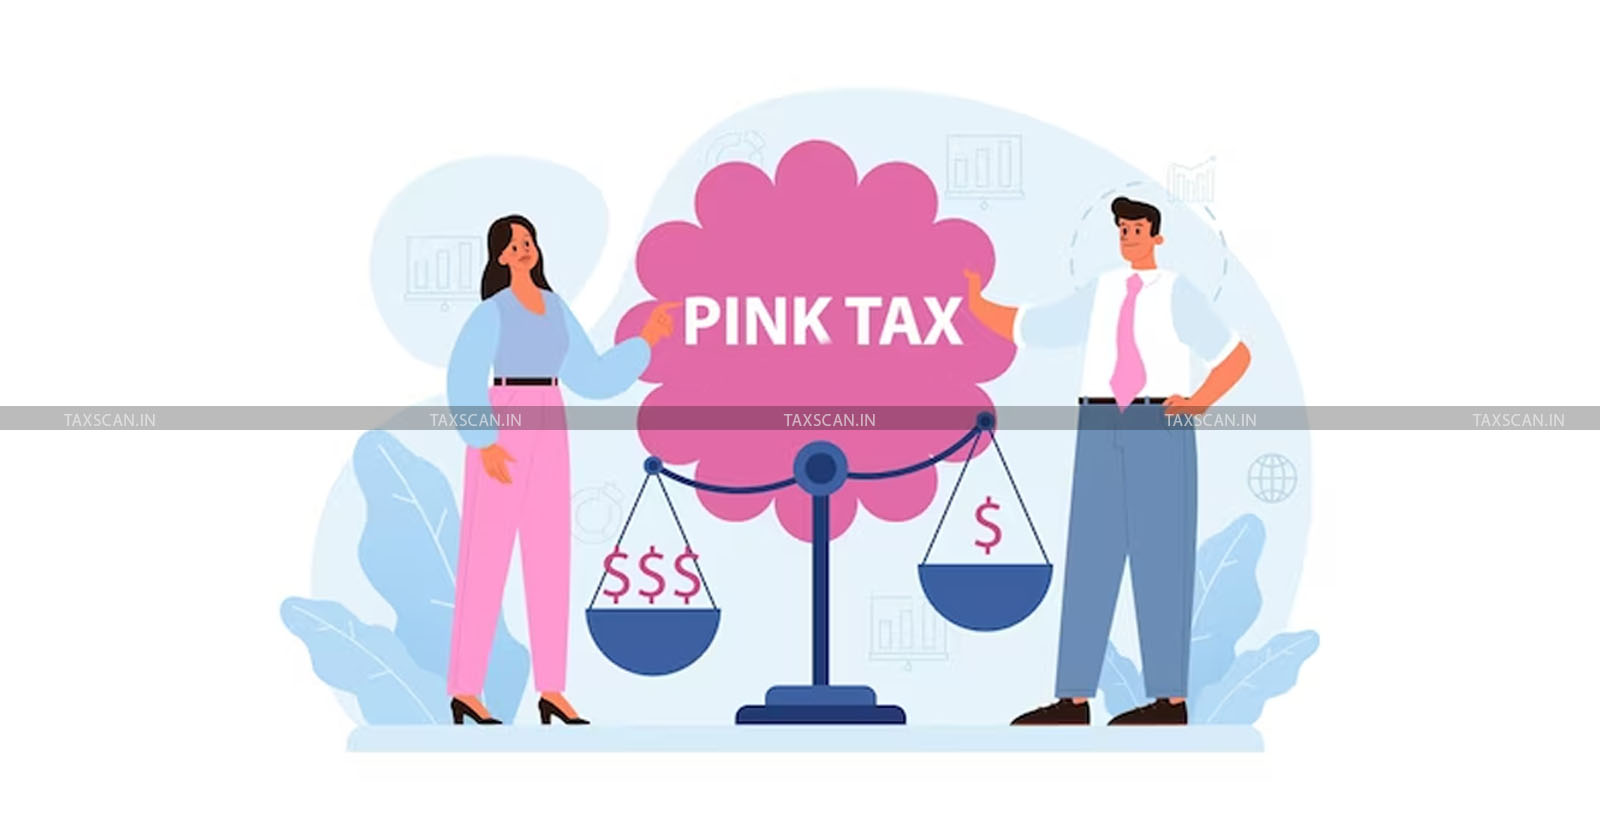 Pink Tax - Gender based pricing - Chick Fries controversy - Discrimination in pricing - Burger King pink packaging - taxscan